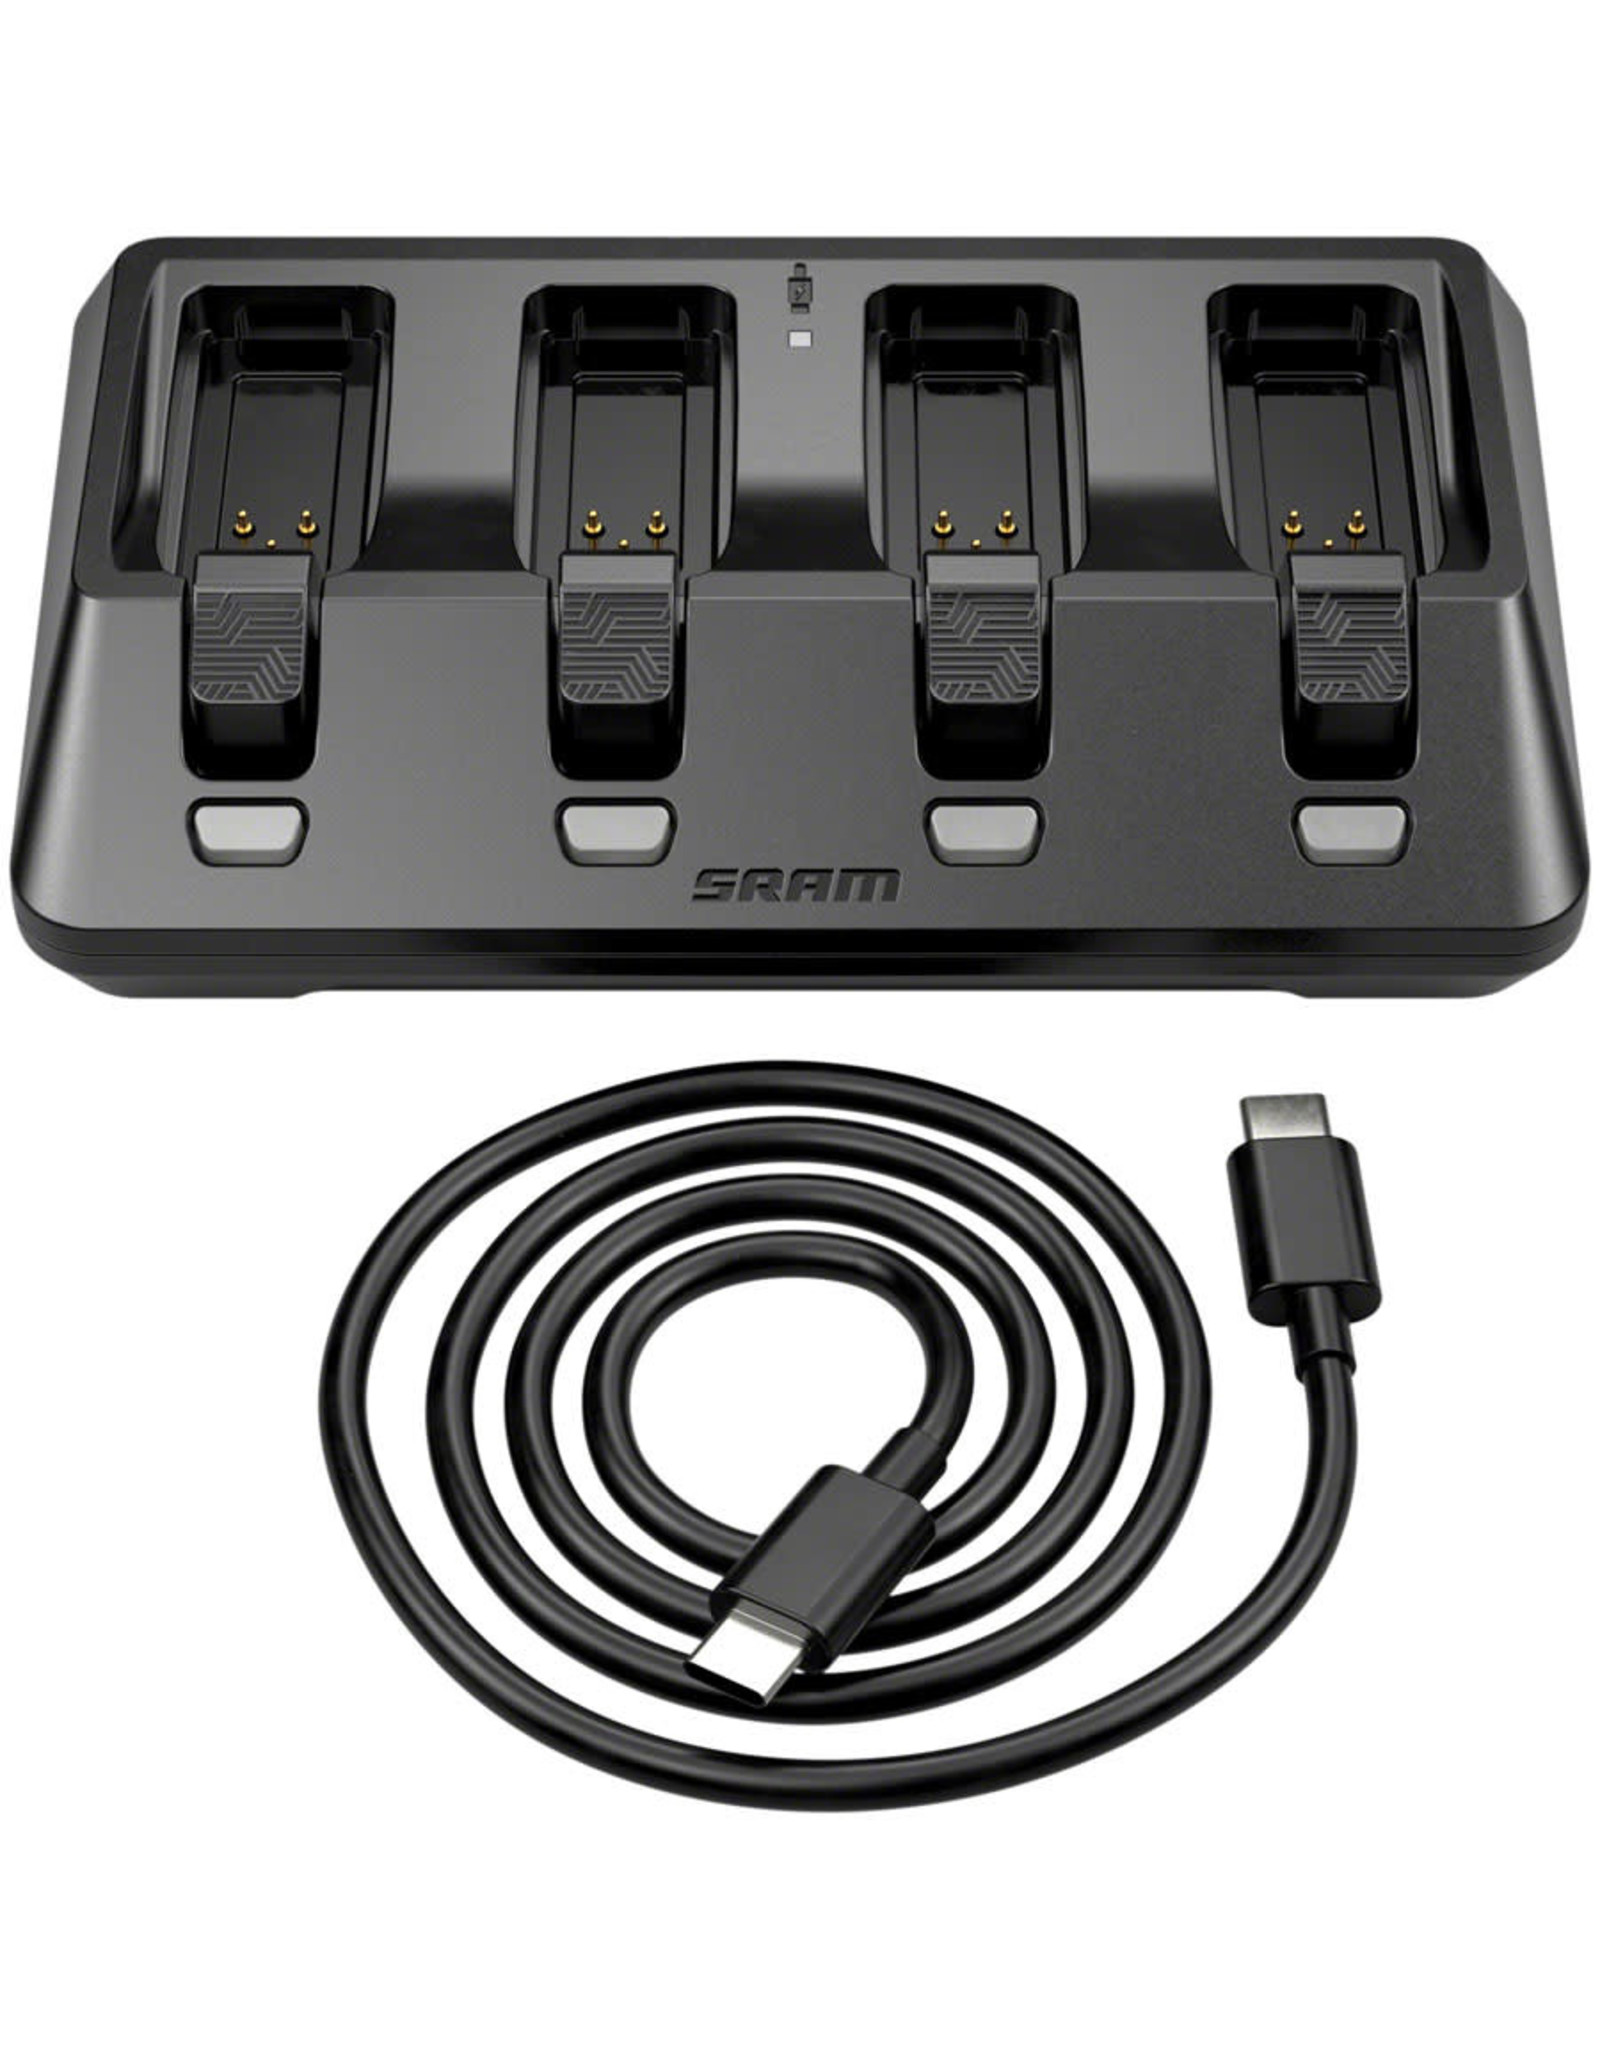 SRAM SRAM AXS eTap 4-Port Battery Base Charger - Includes USB-C Cord  (Batteries not included)